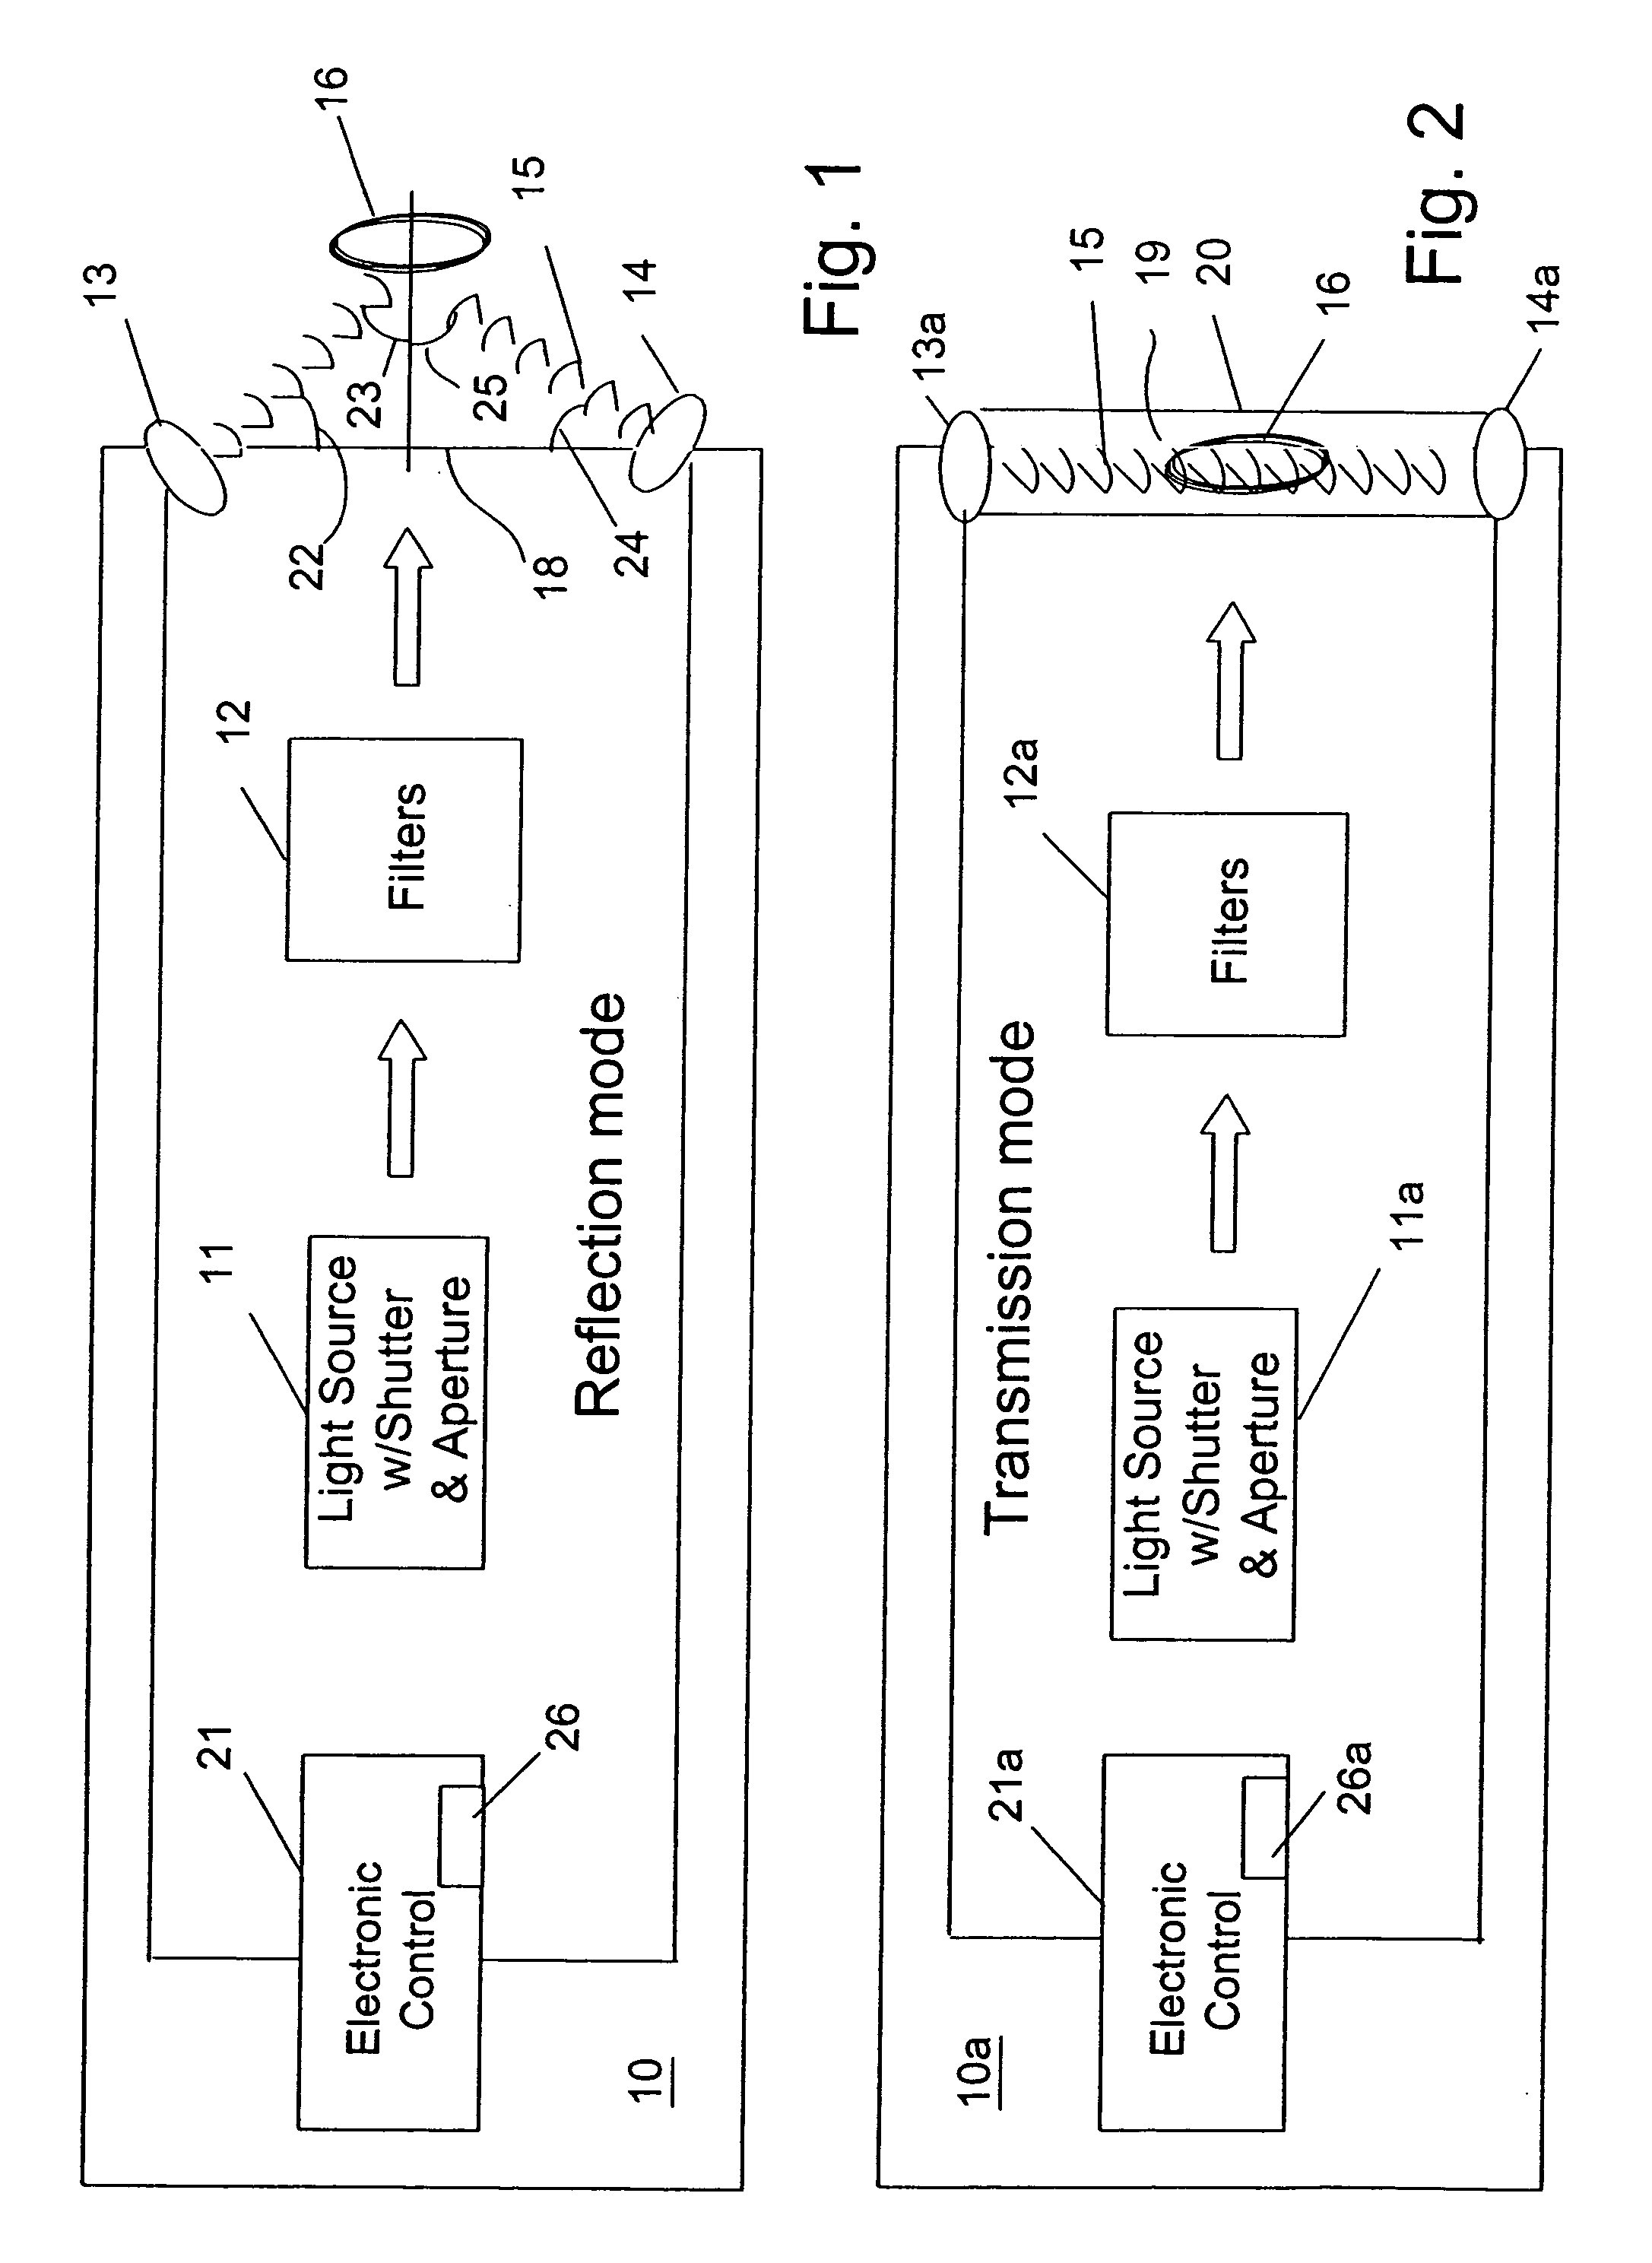 Method and apparatus for remote sensing utilizing a reverse photoacoustic effect